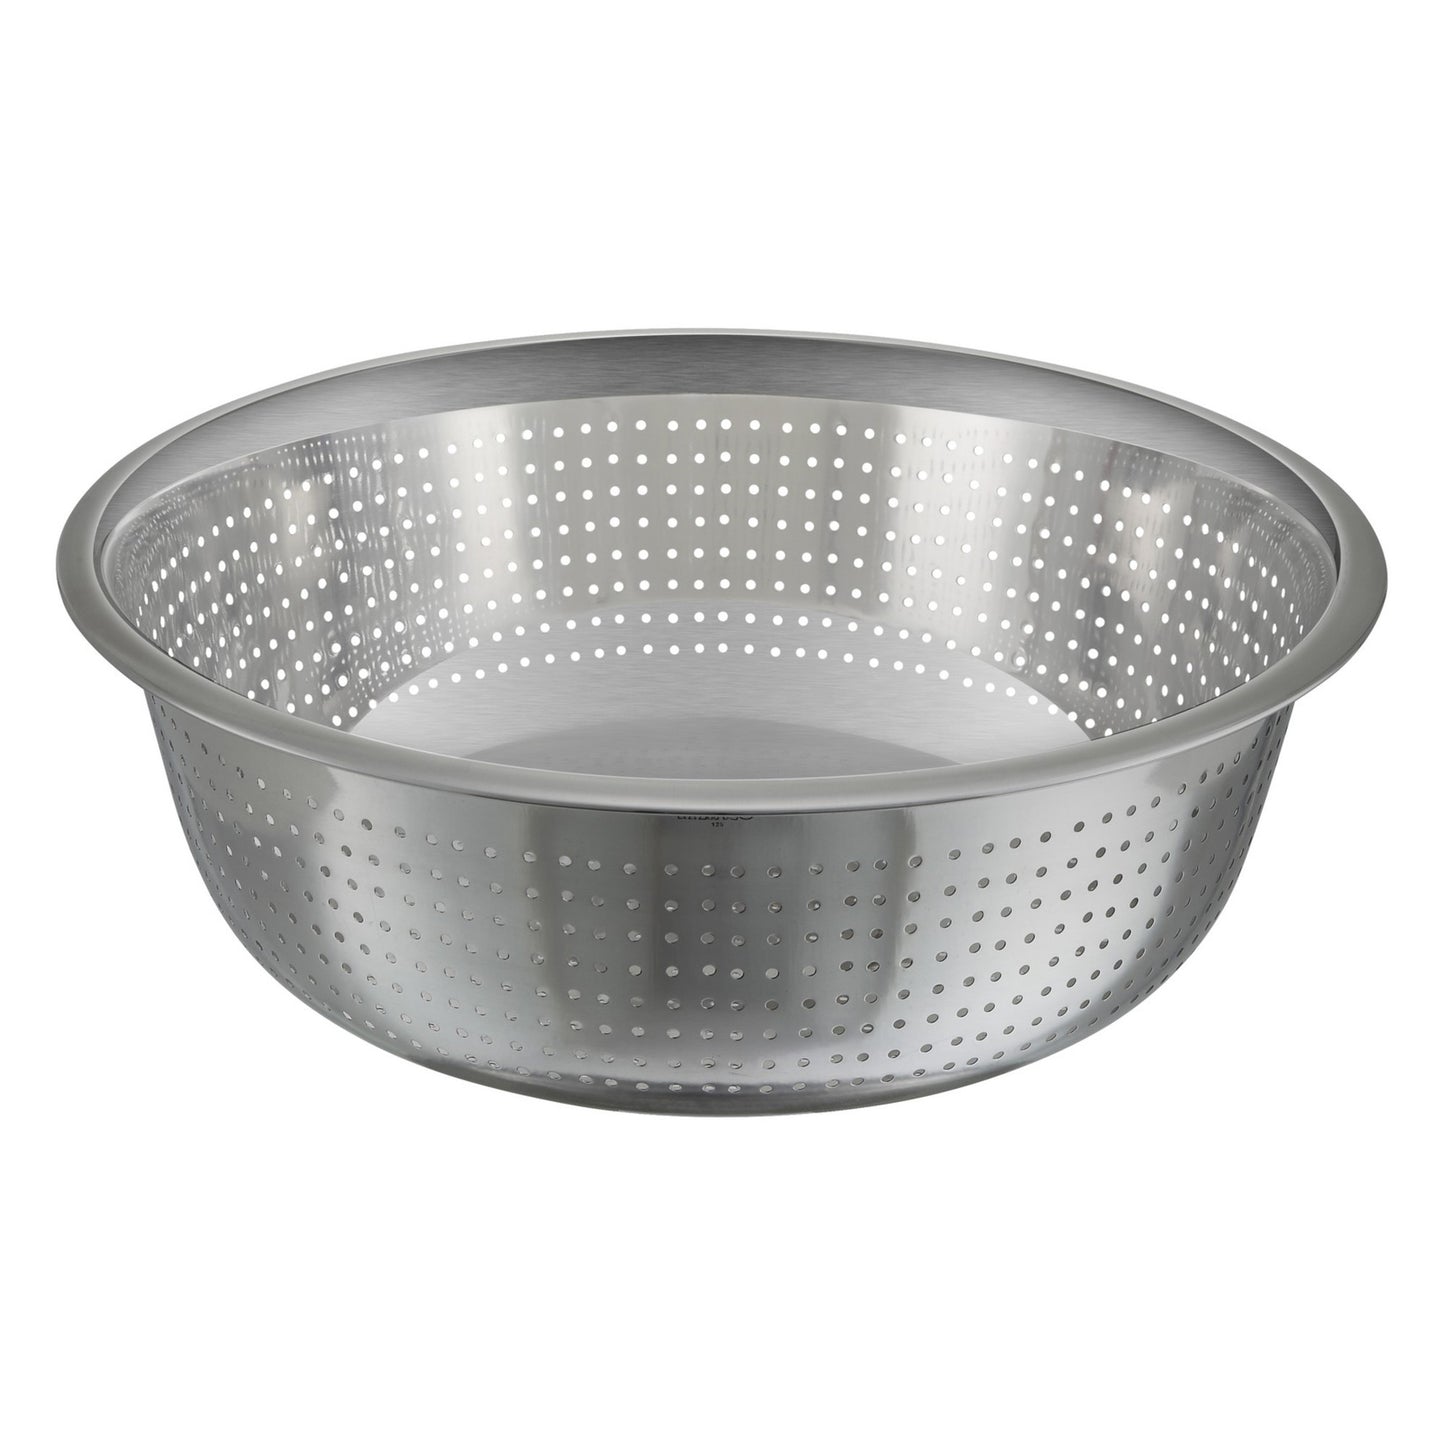 CCOD-15S - 15" Diameter Stainless Steel Chinese-Style Colander with 2.5 mm Drain Holes